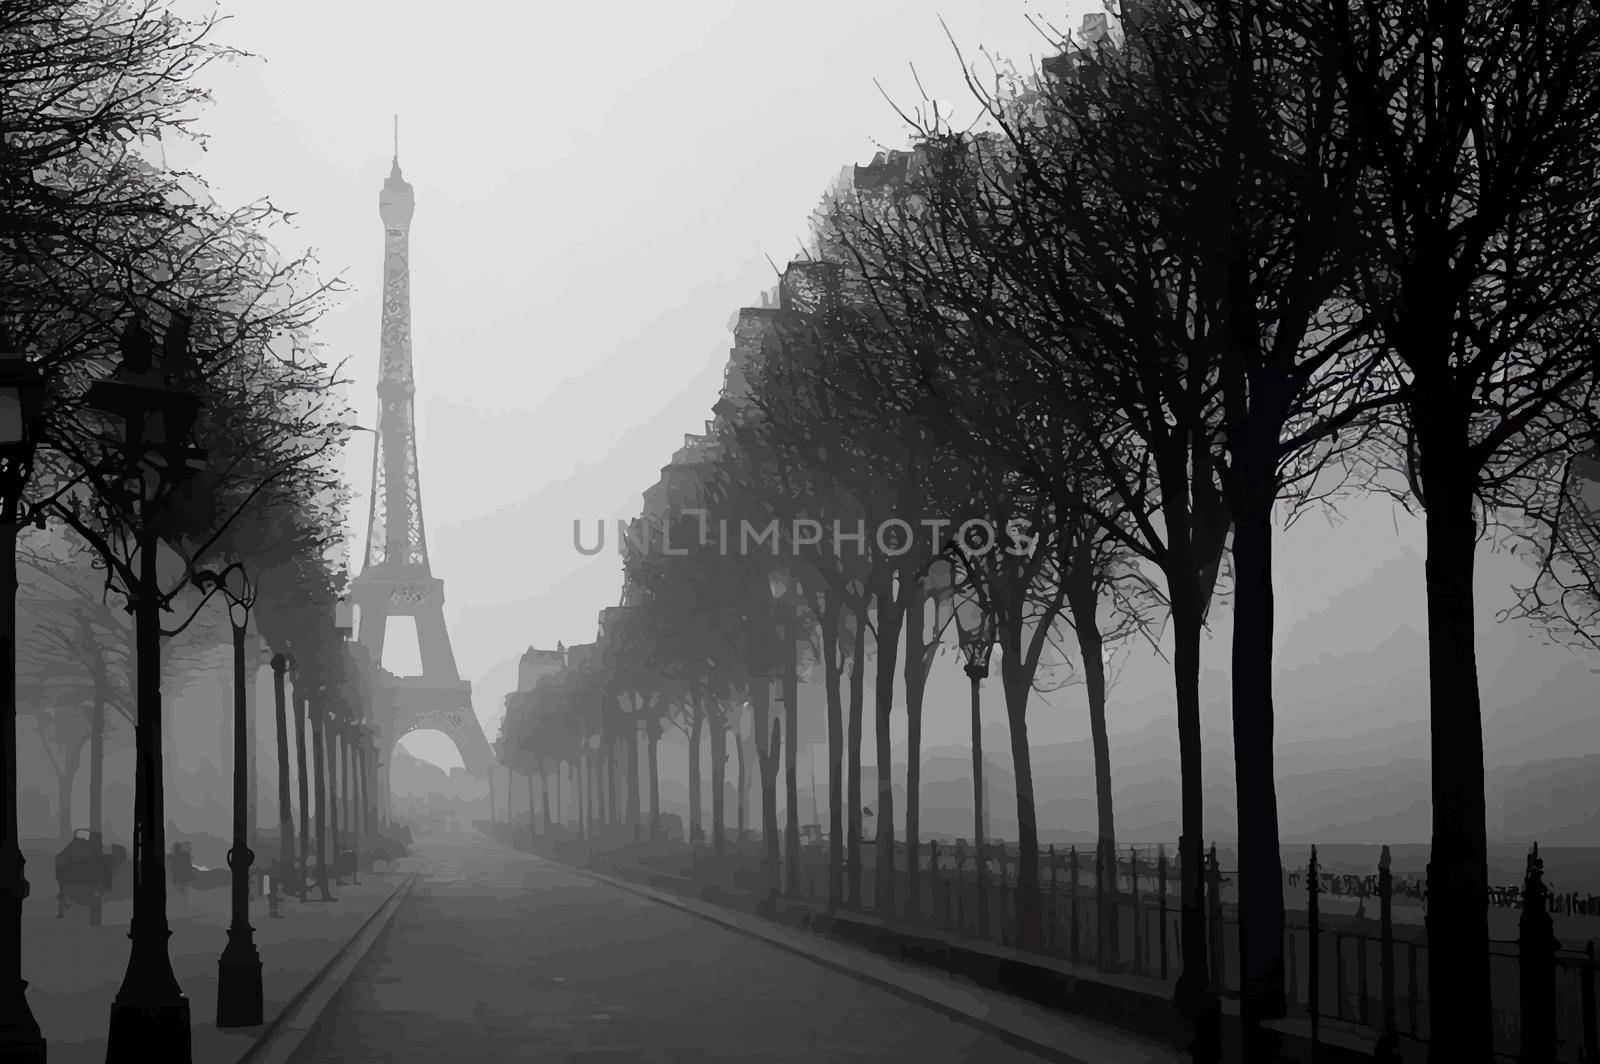 view of paris street with the Eiffel Tower in the background in a foggy day.